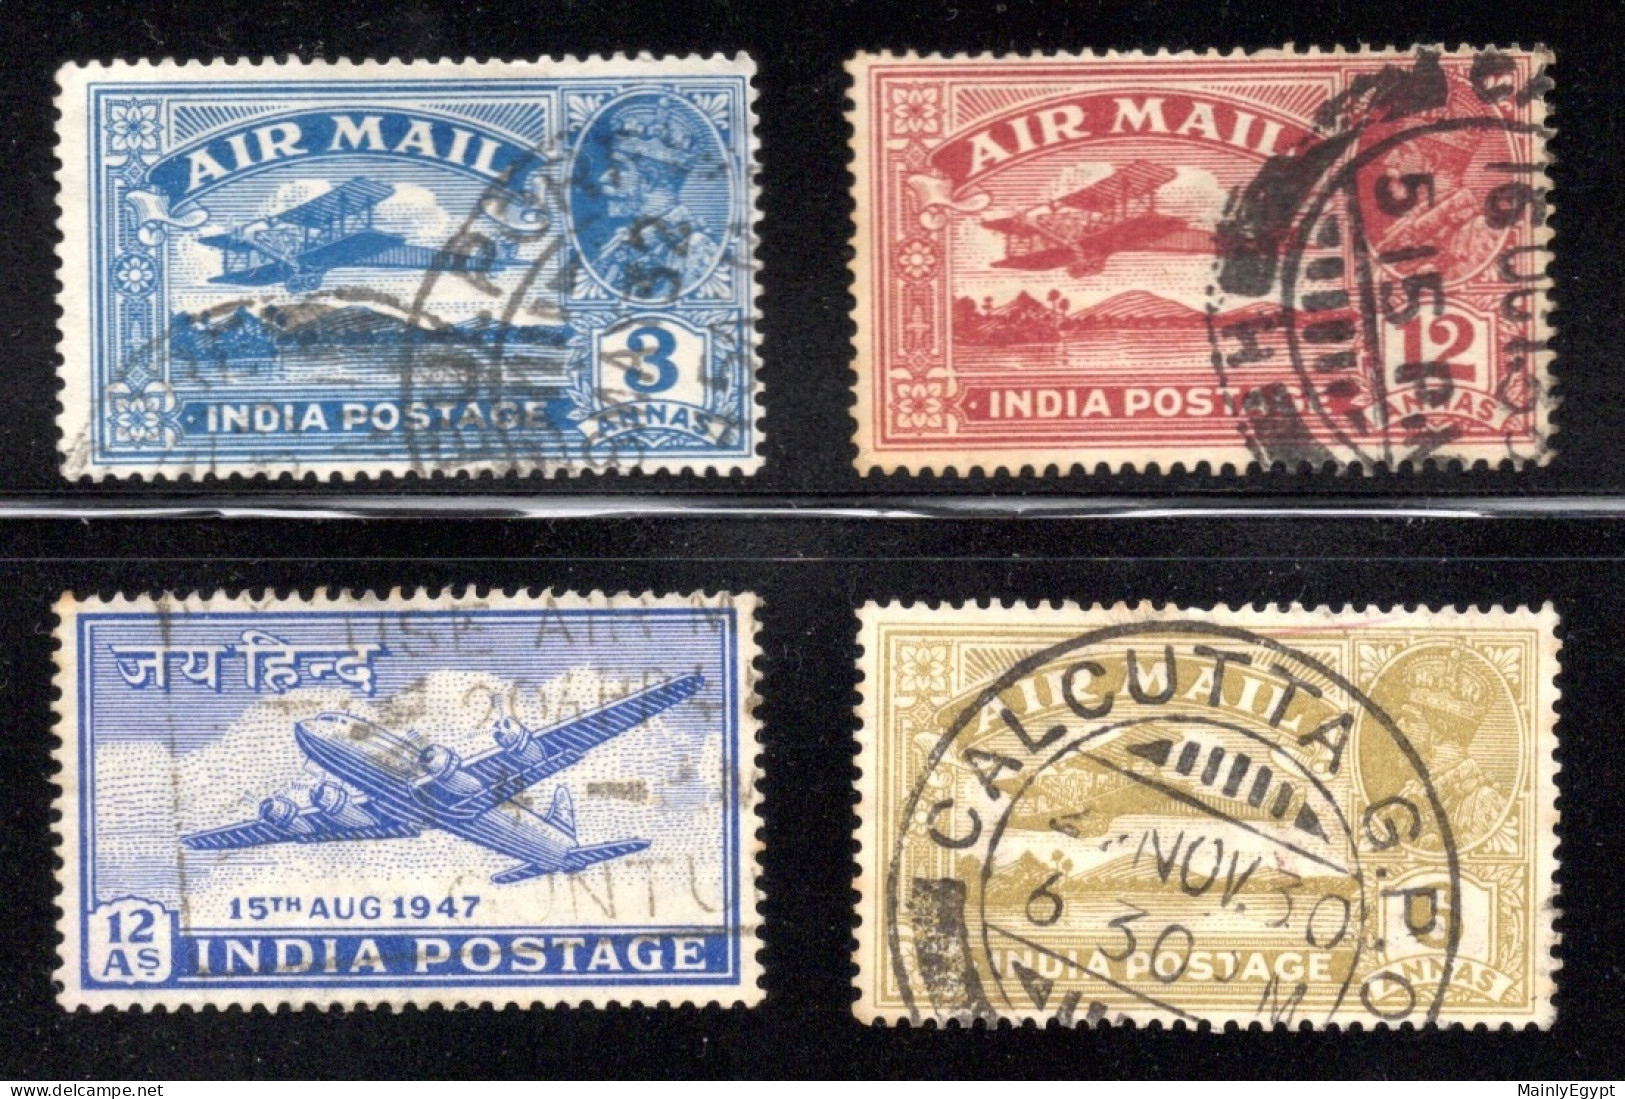 INDIA: 4 Airmail Stamps #19 - Used Stamps